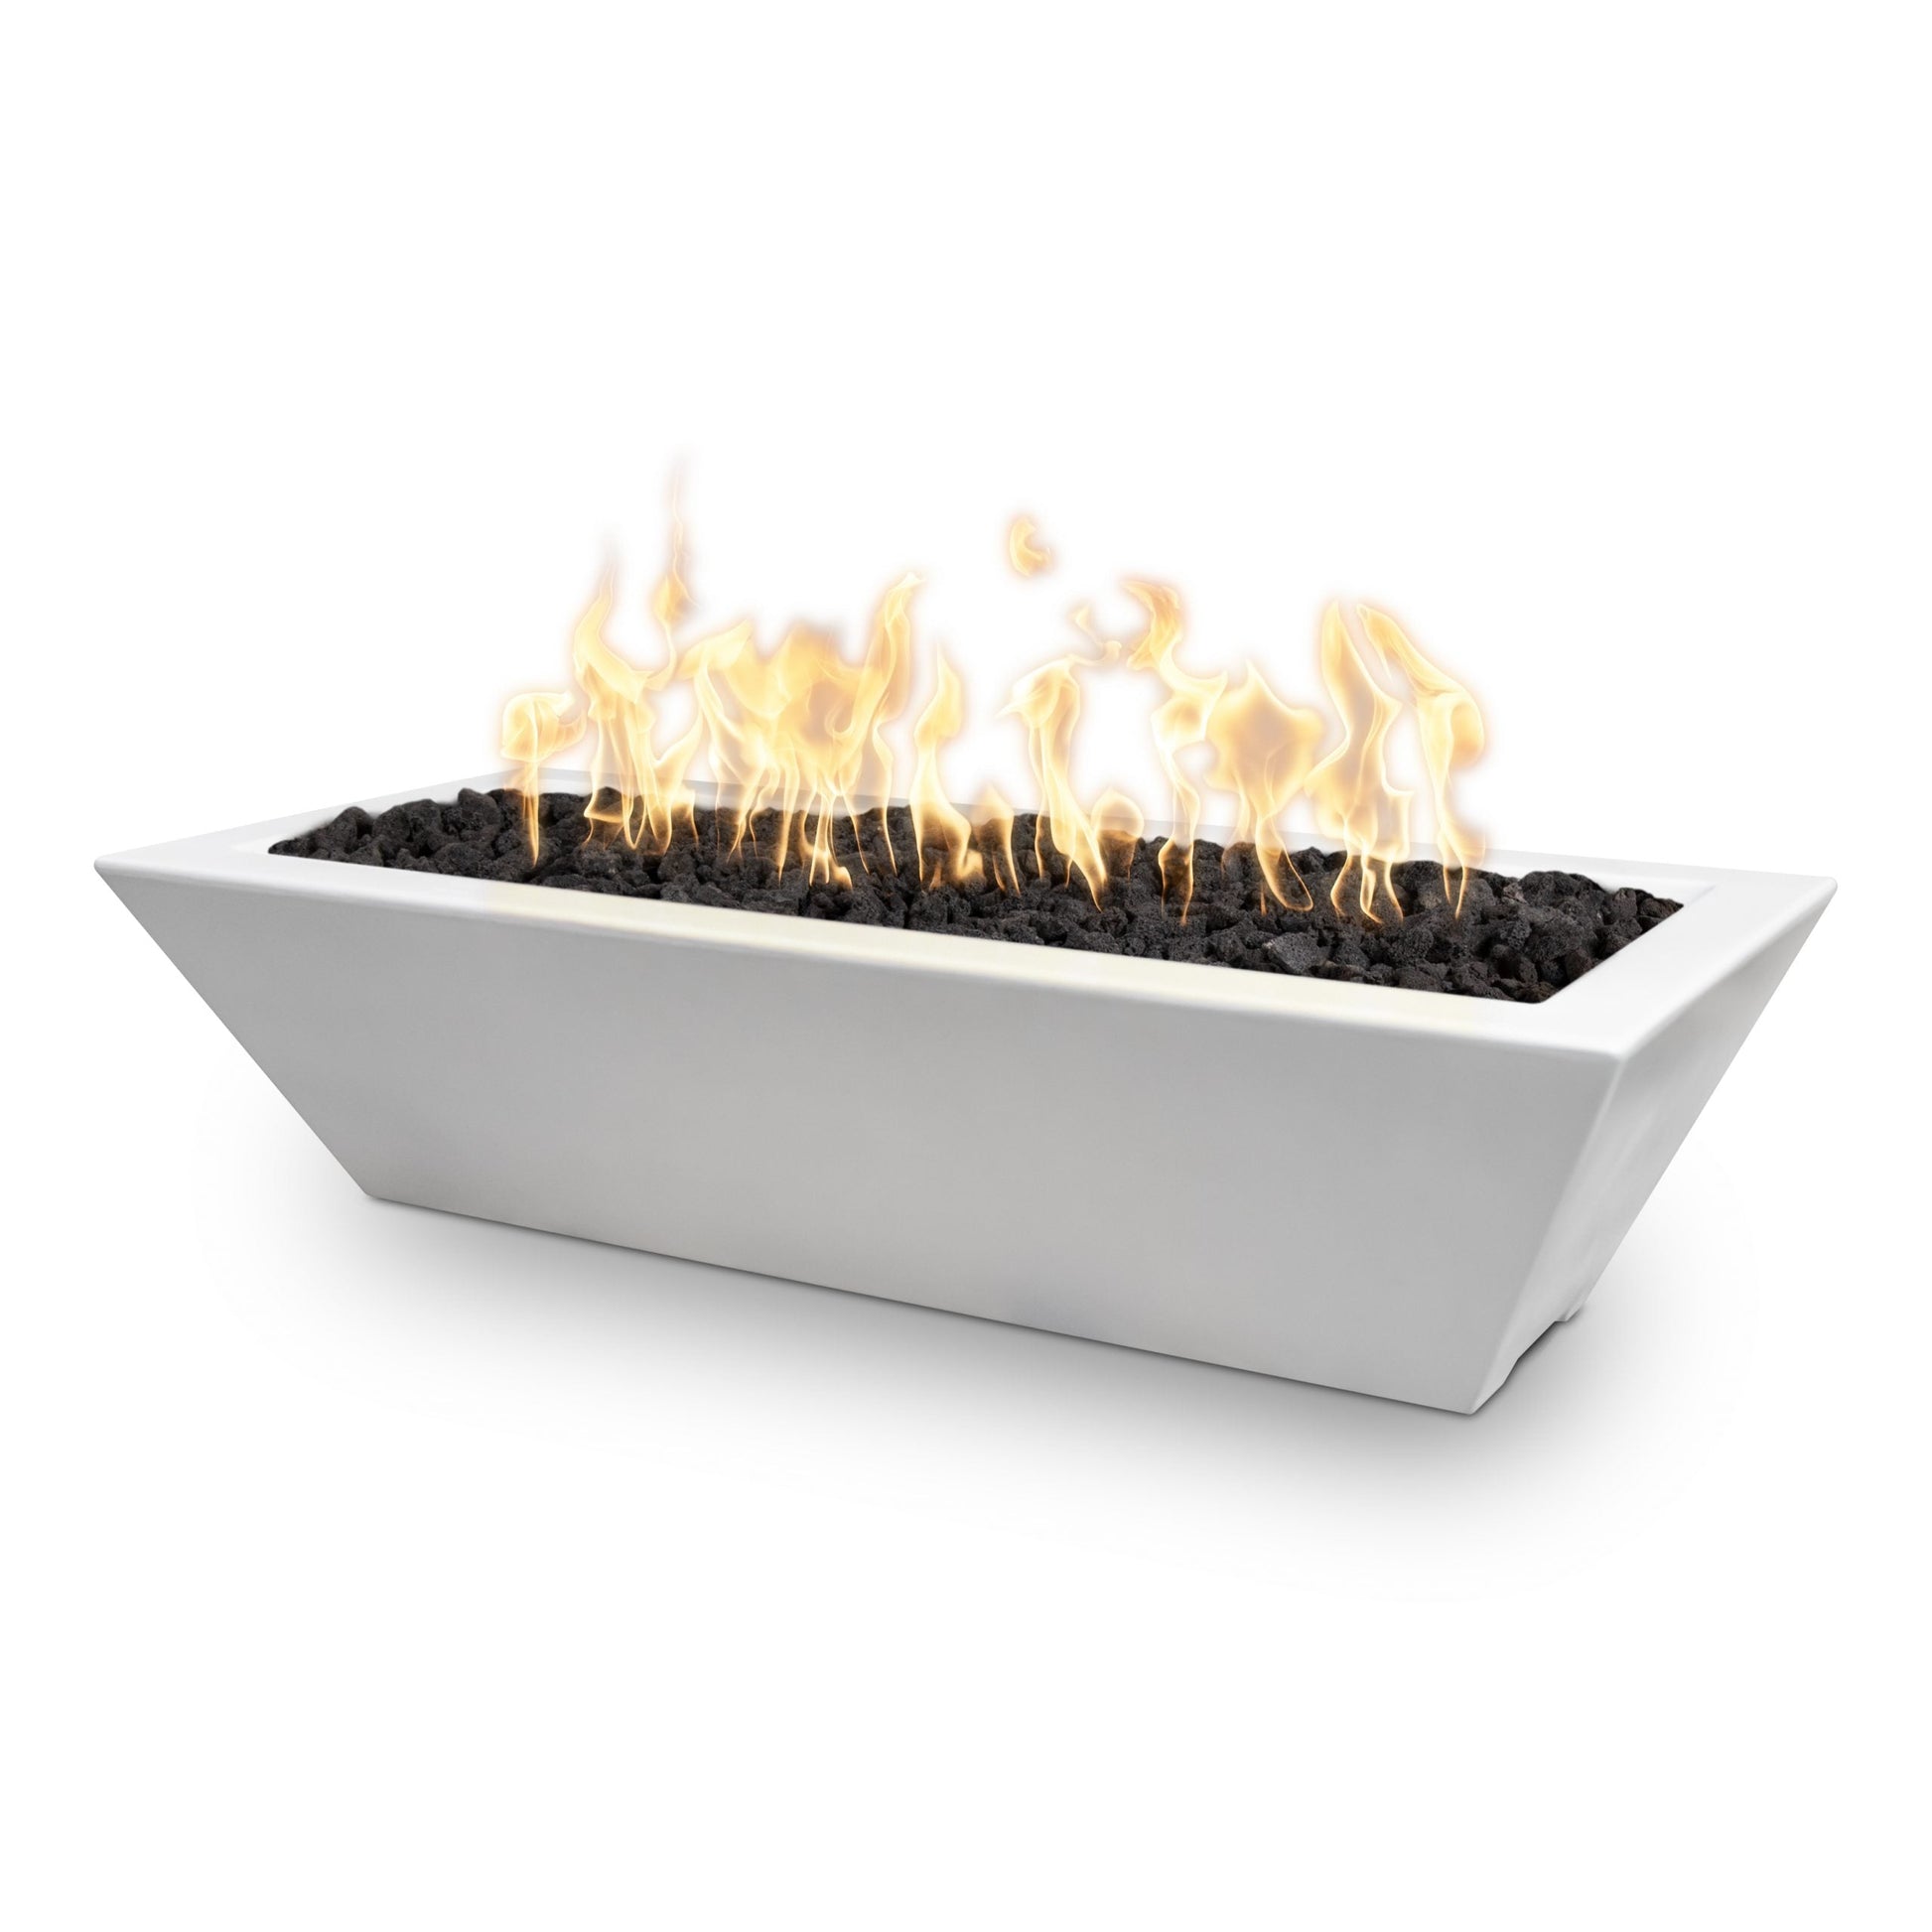 The Outdoor Plus Linear Maya 72" Ash GFRC Concrete Liquid Propane Fire Bowl with Match Lit with Flame Sense Ignition